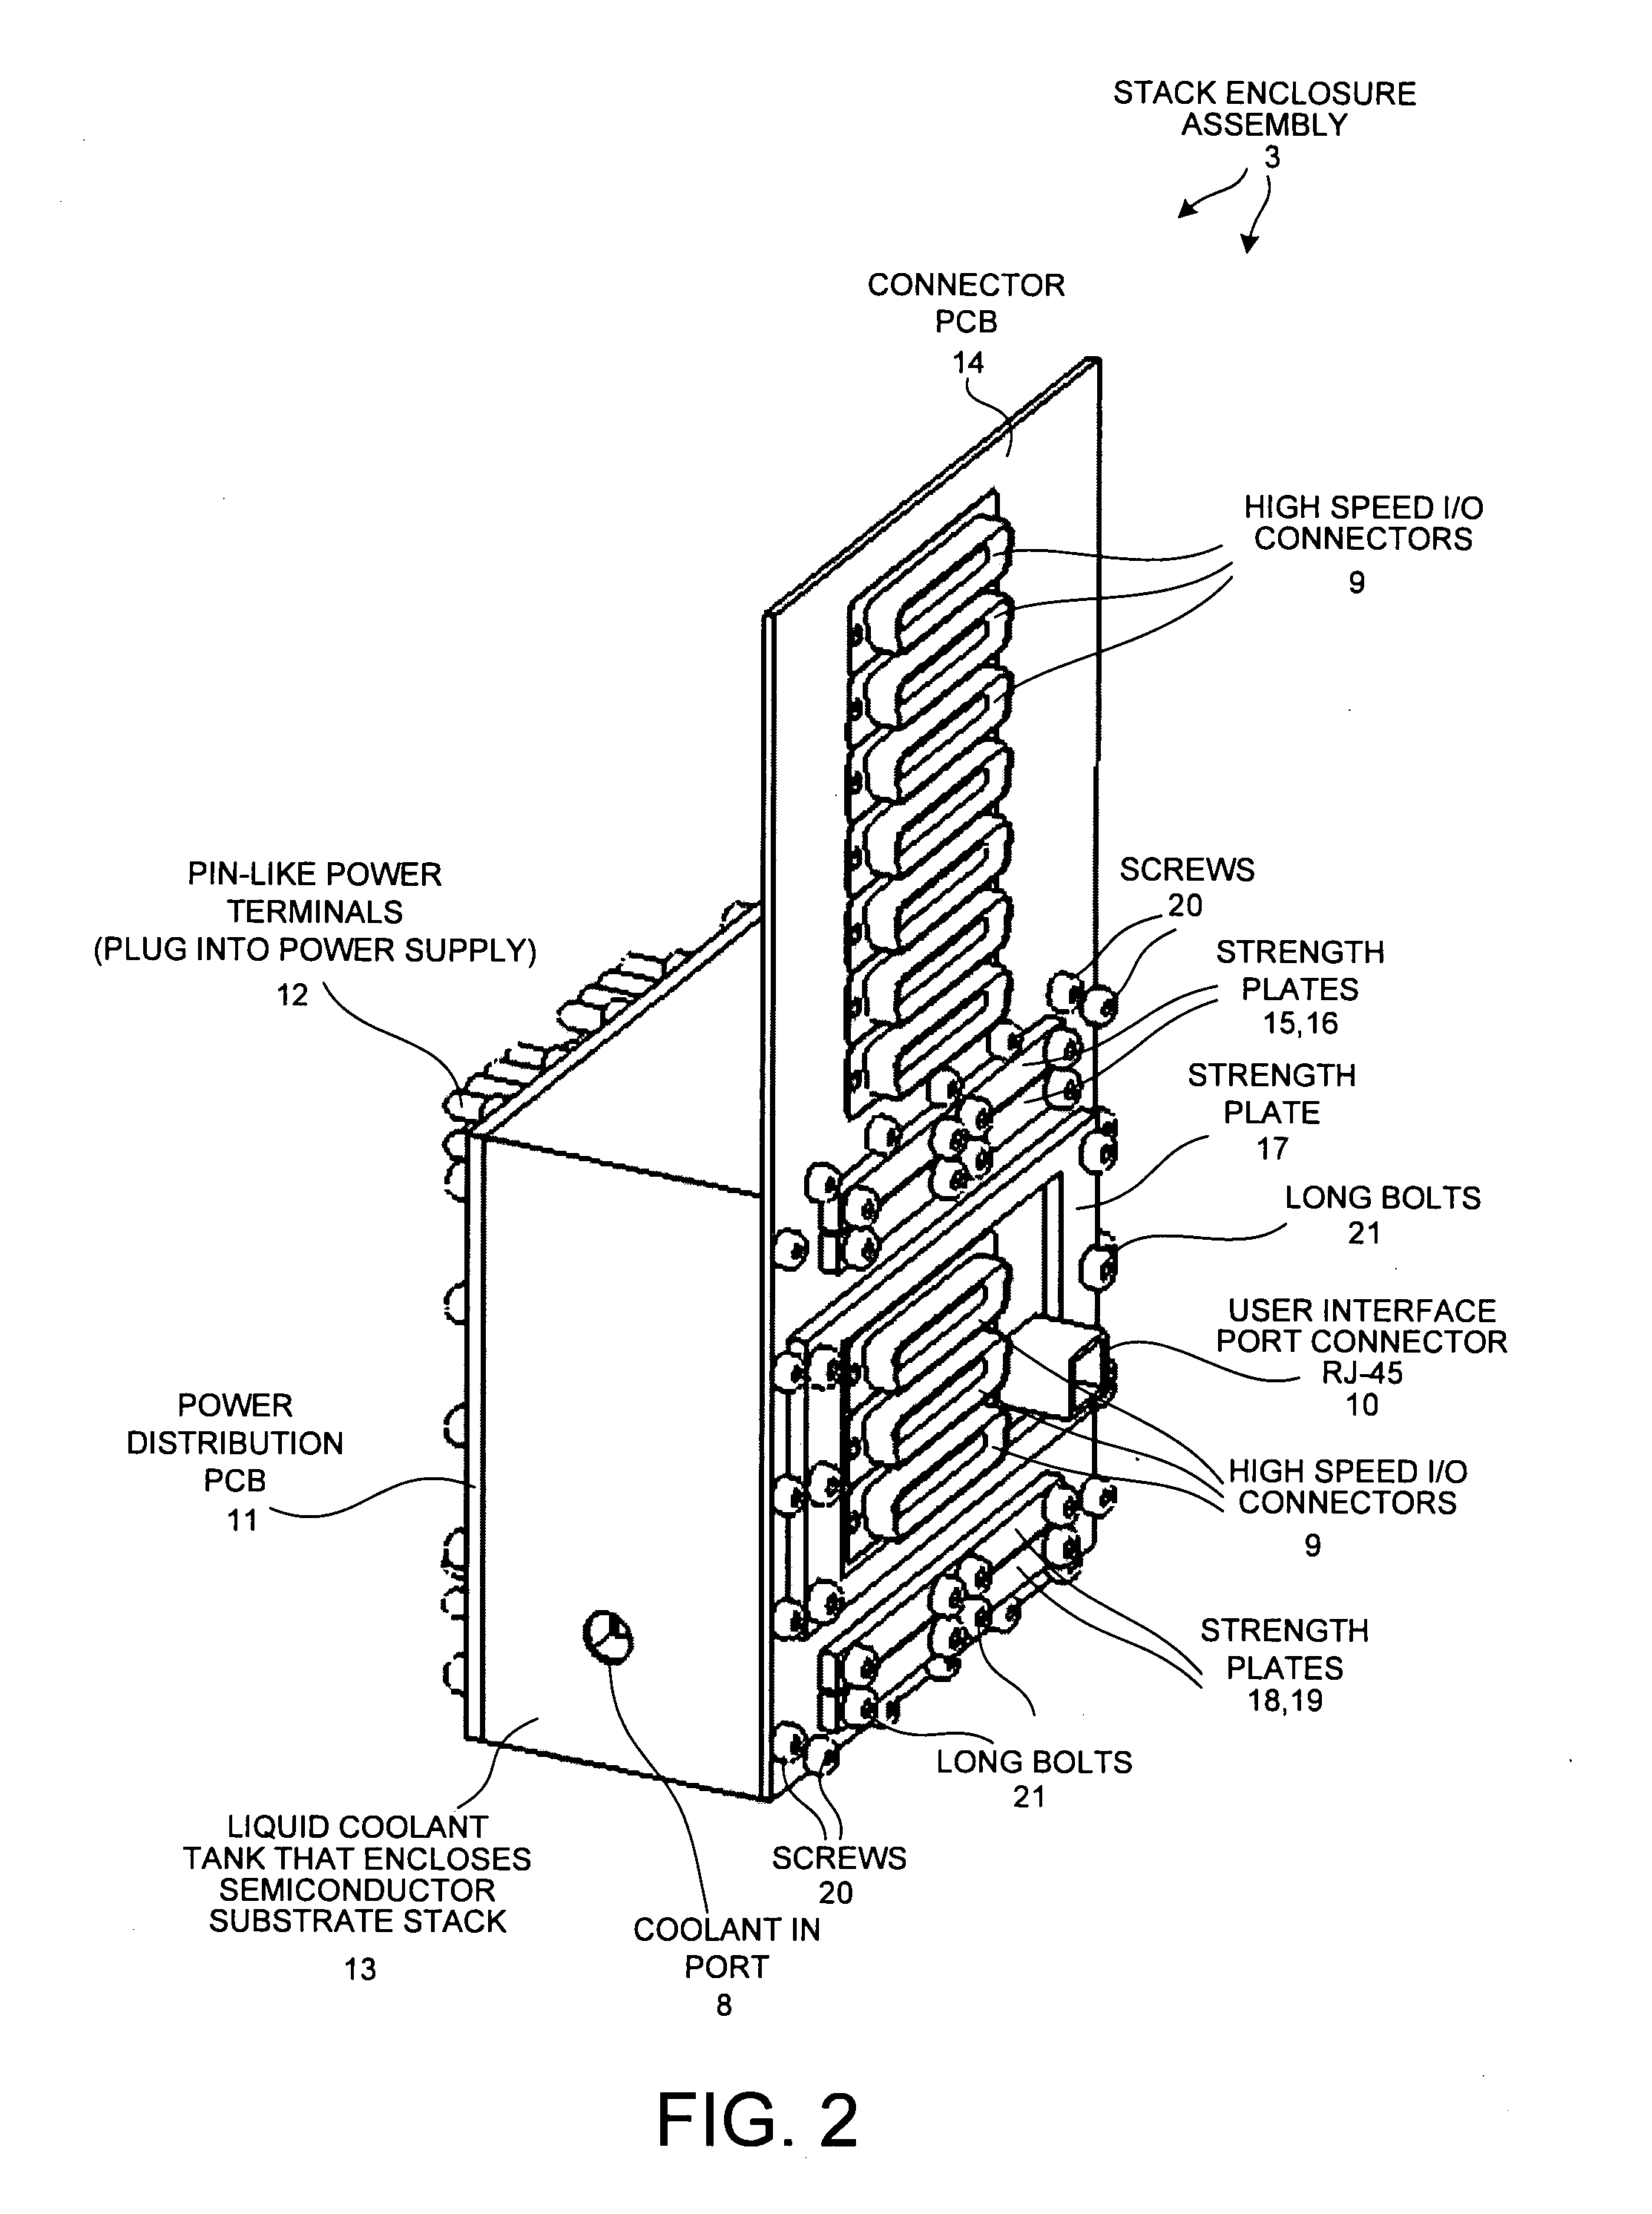 Comb-shaped power bus bar assembly structure having integrated capacitors